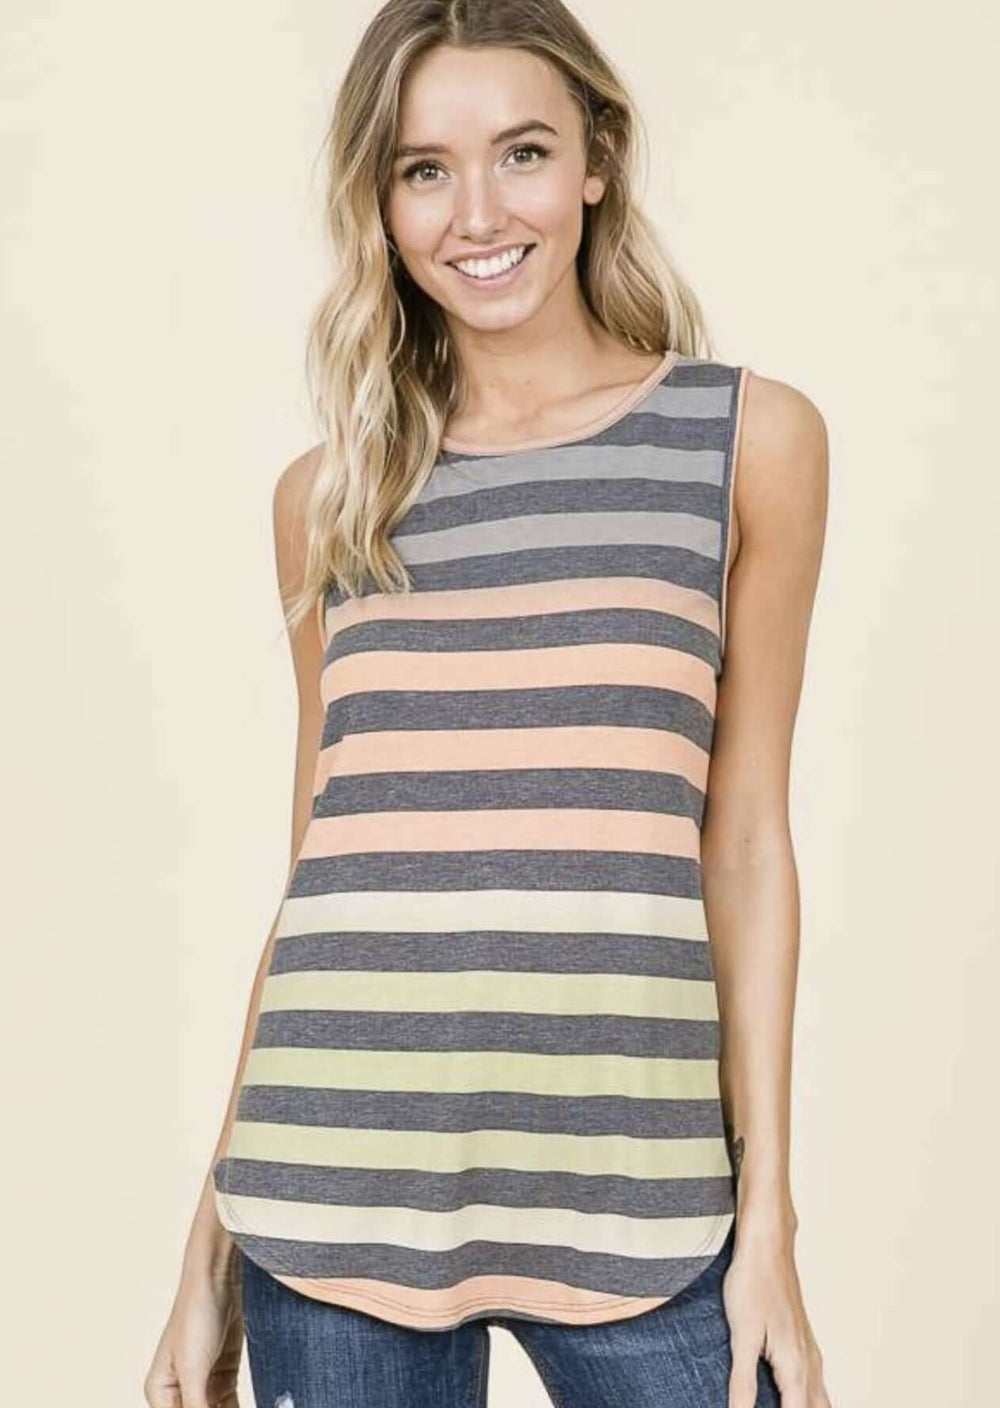 Made in USA Ladies Sleeveless Casual Top, Striped Detail, Round Neckline, Longer Length, Rounded Hem in Auburn Sunset Hues | Classy Cozy Cool Made in America Boutique